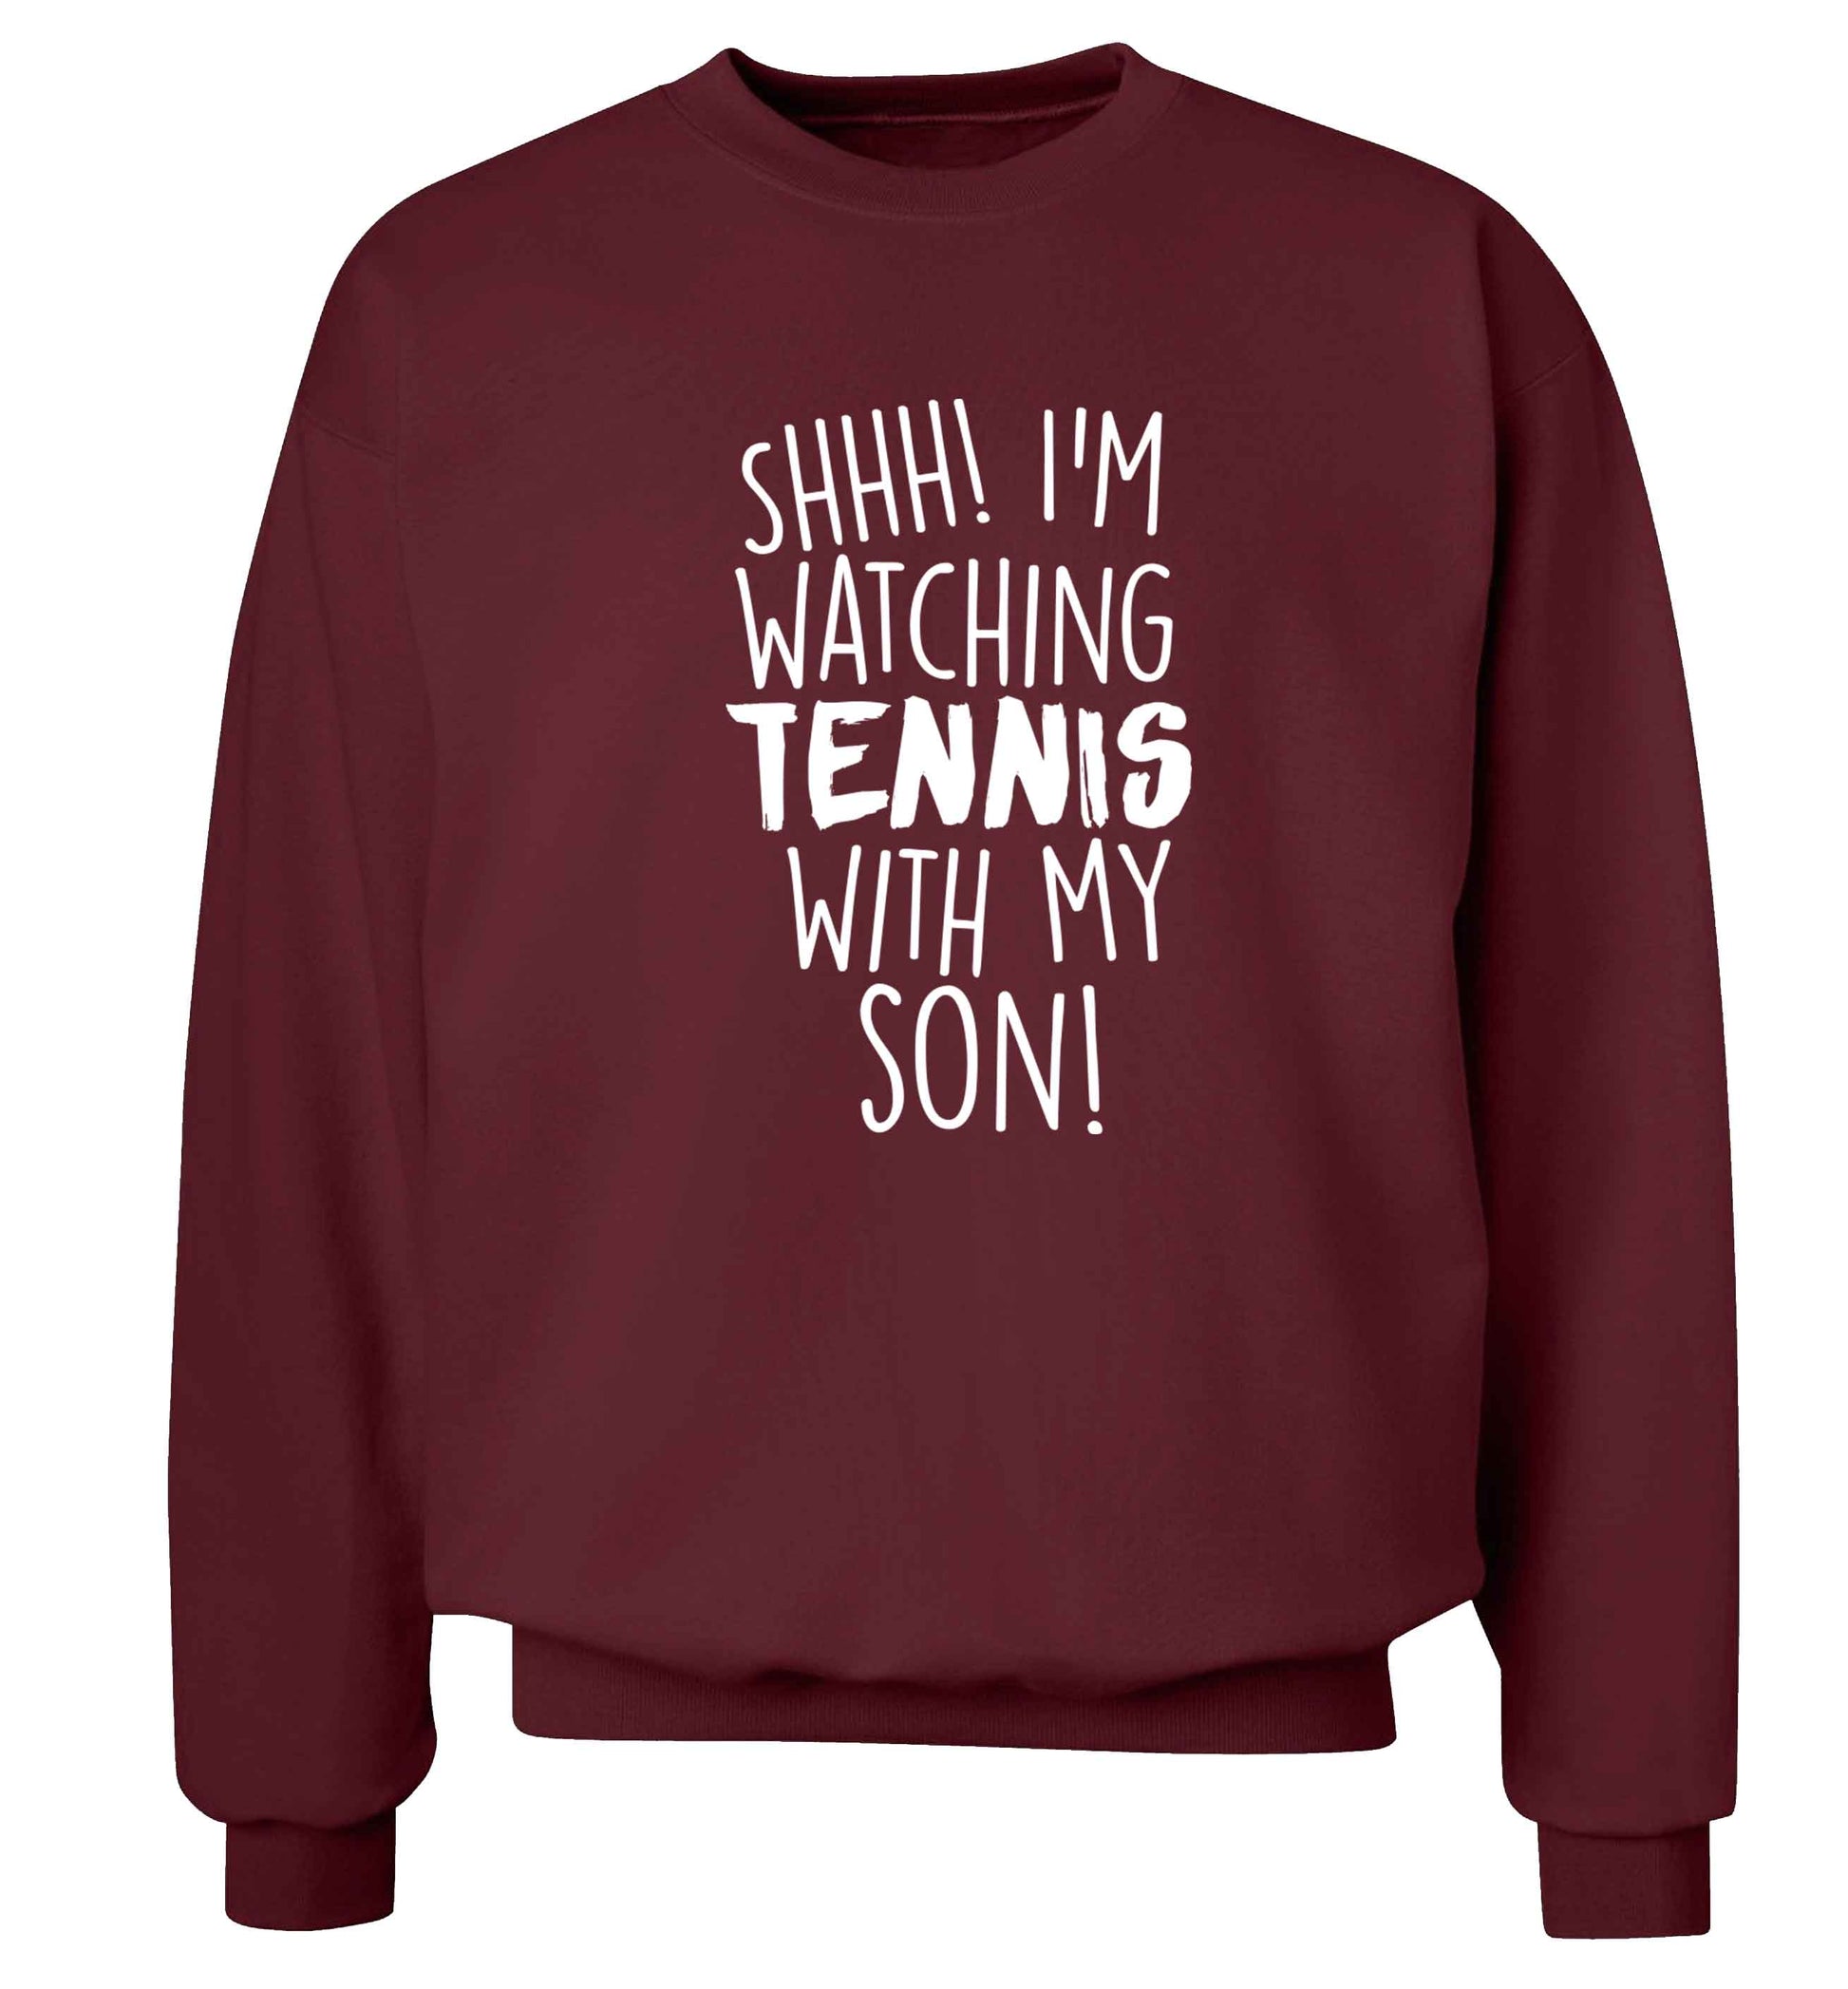 Shh! I'm watching tennis with my son! Adult's unisex maroon Sweater 2XL